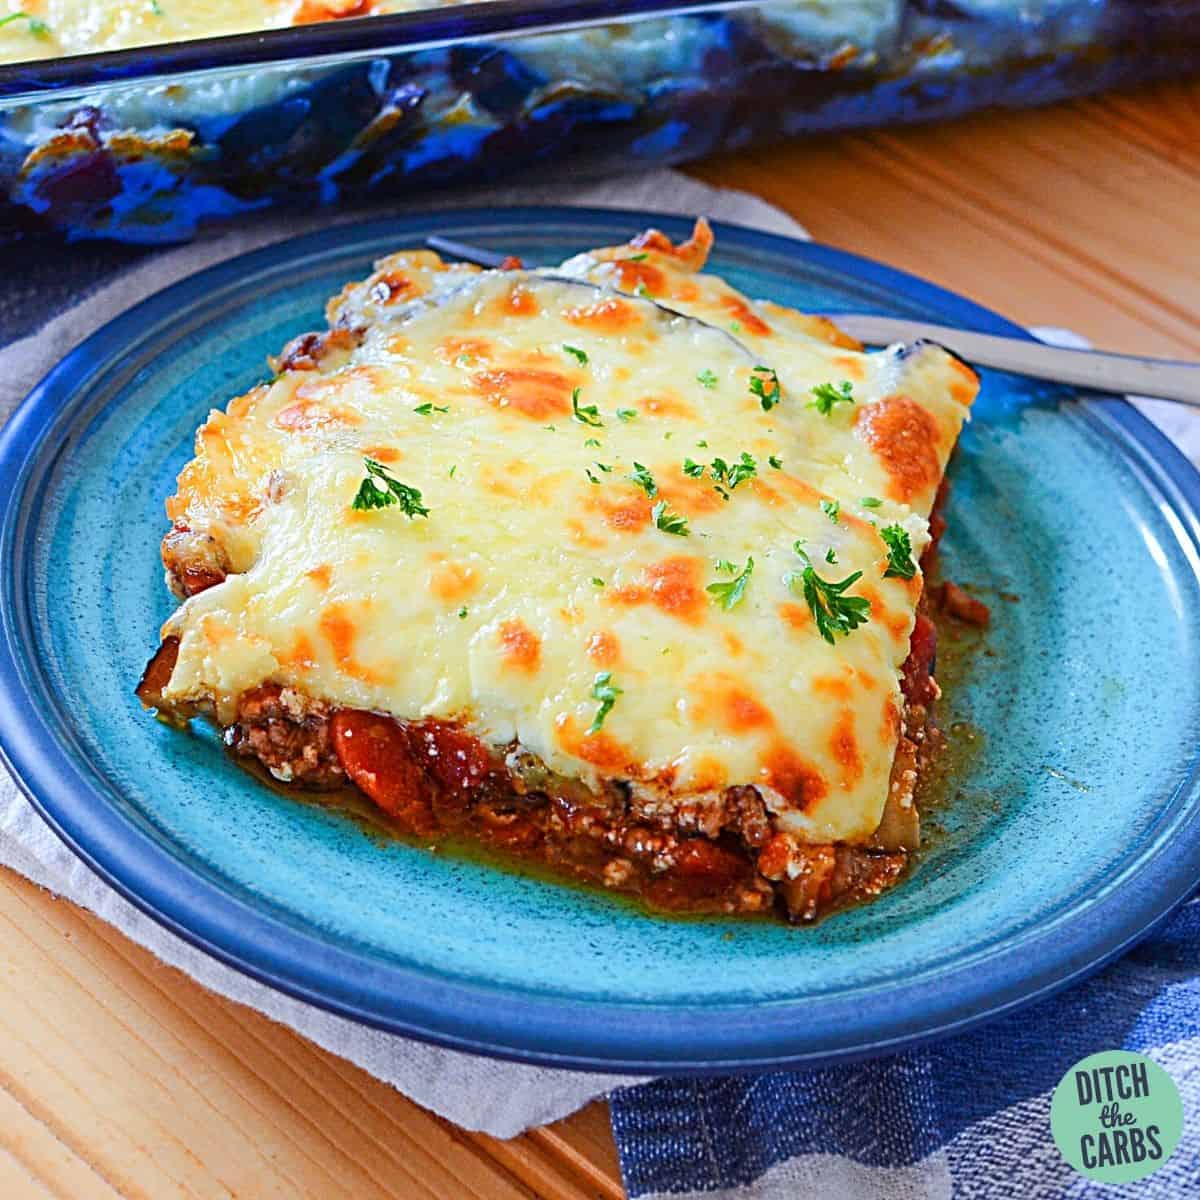 https://thinlicious.com/wp-content/uploads/2022/04/Low-Carb-Gluten-Free-Moussaka-with-Eggplant.jpg